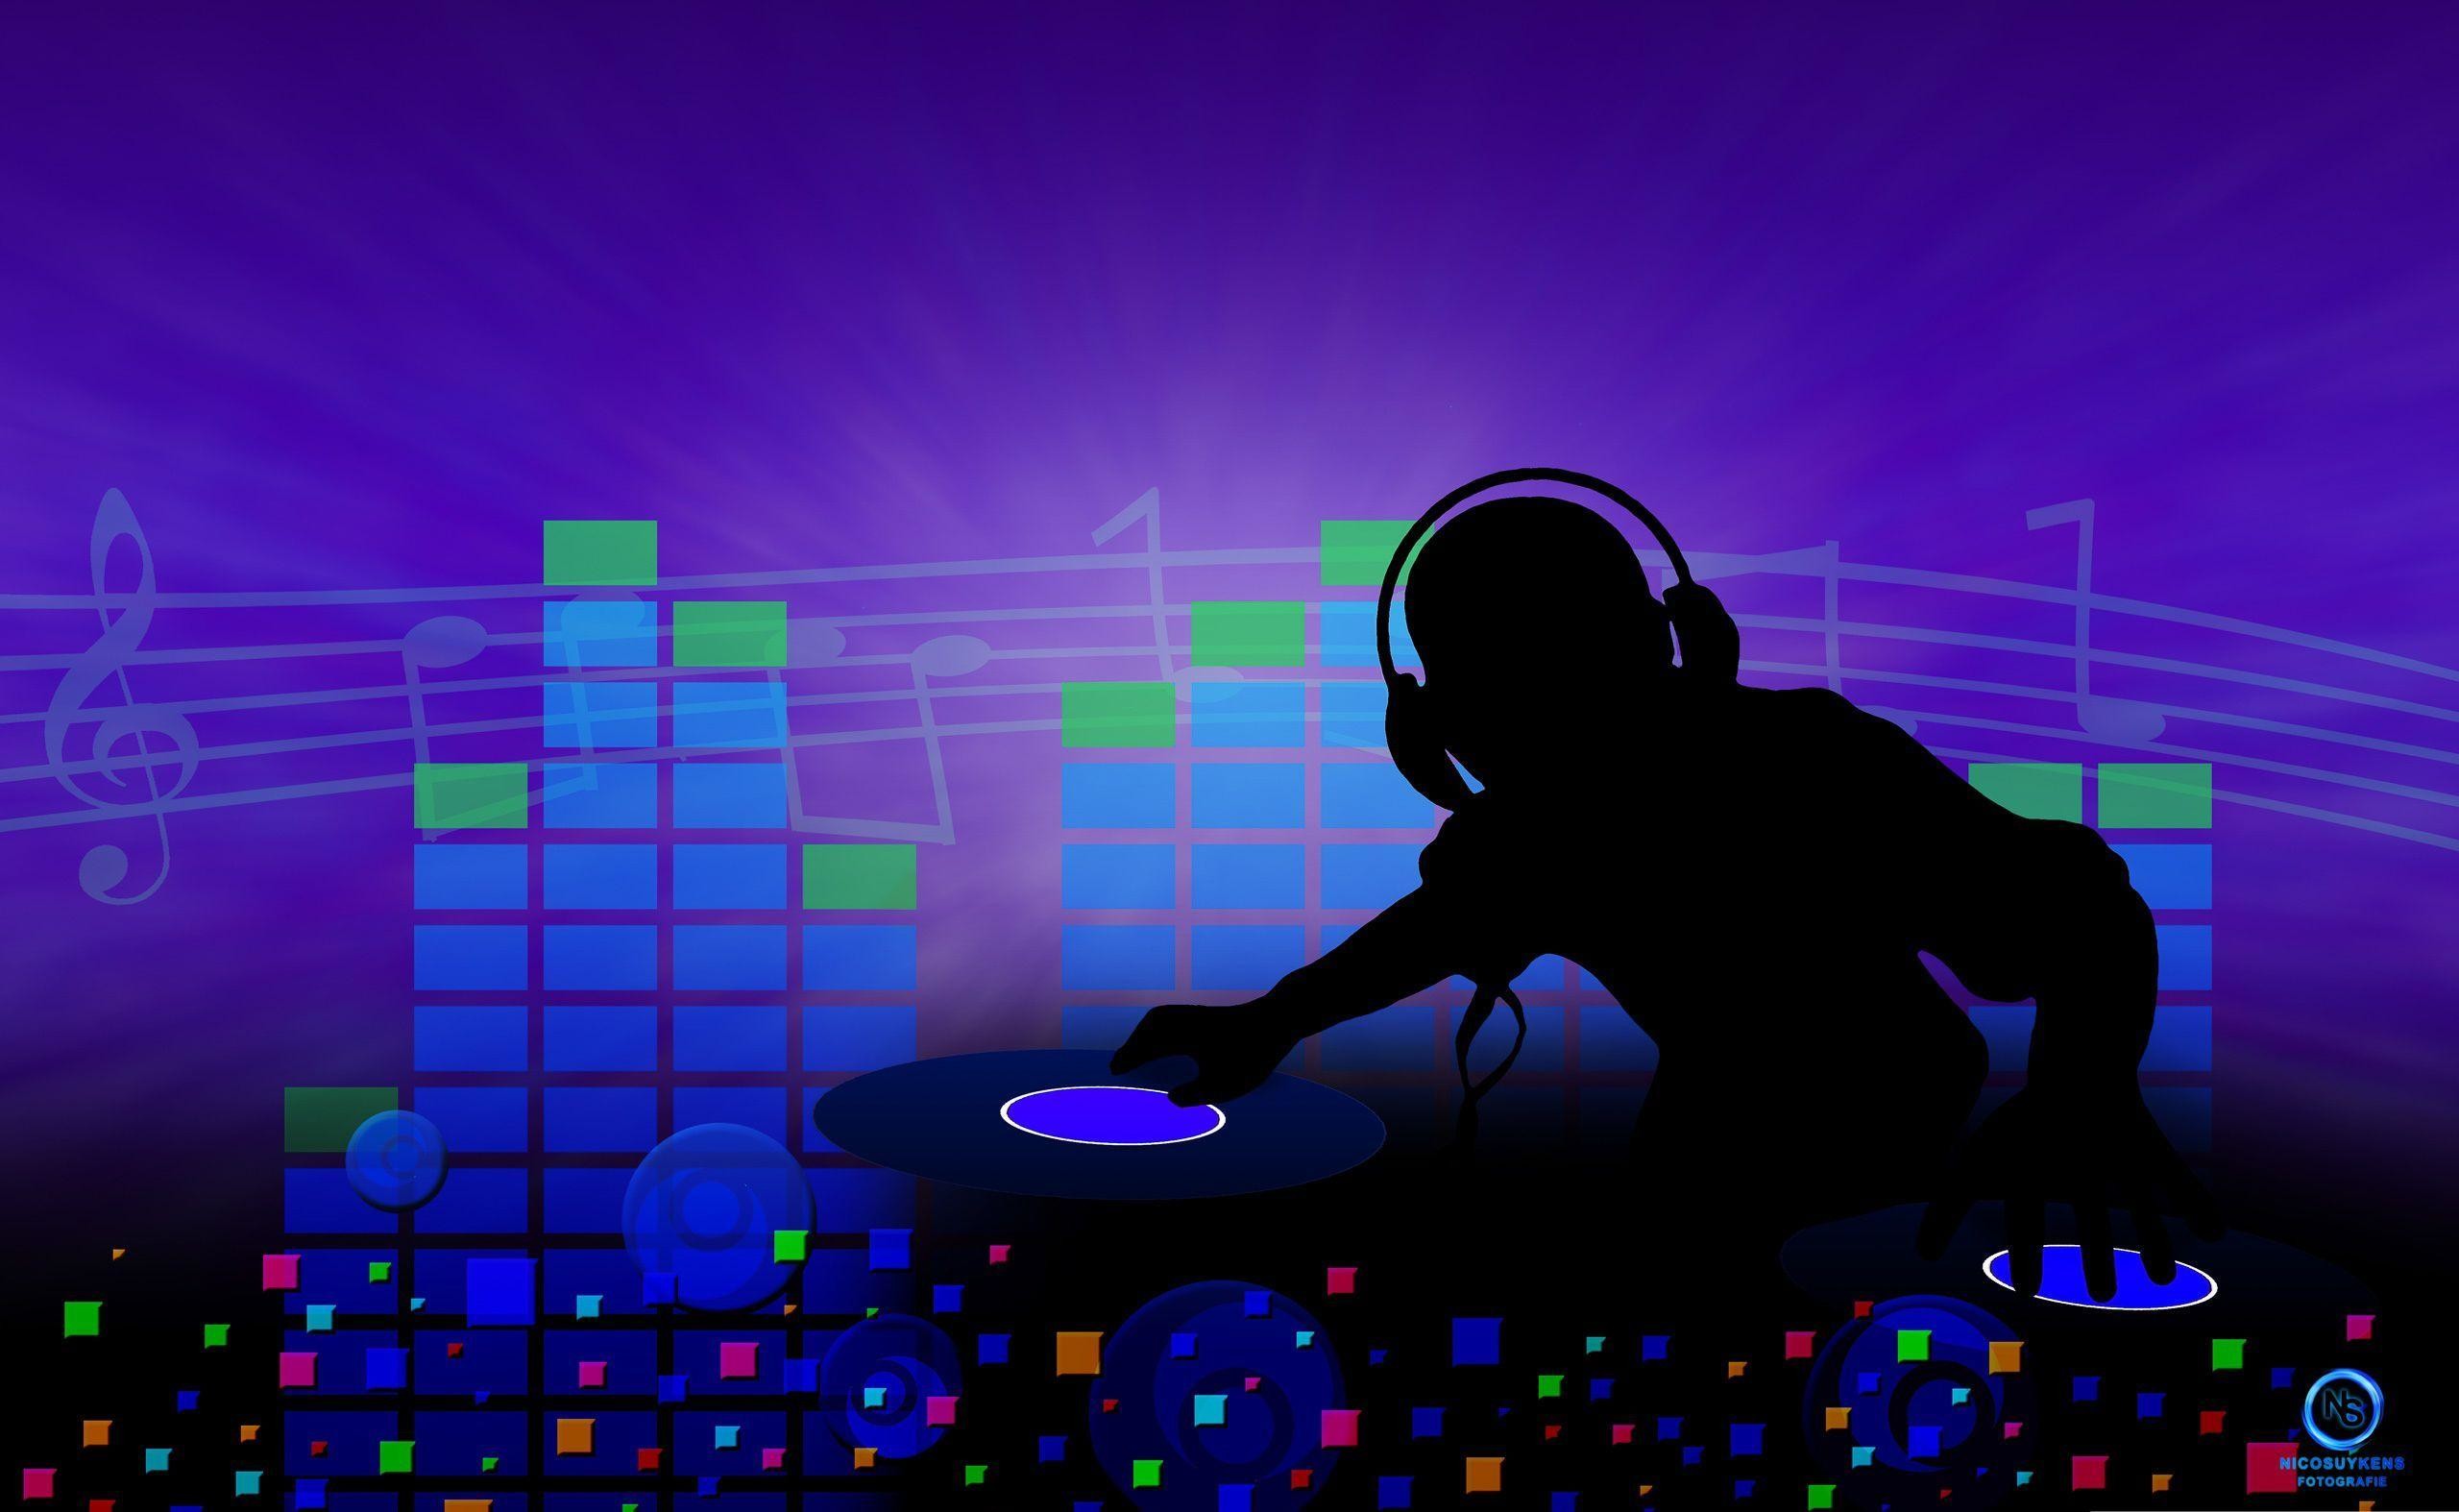 DJ Wallpapers HD | Wallpapers, Backgrounds, Images, Art Photos.